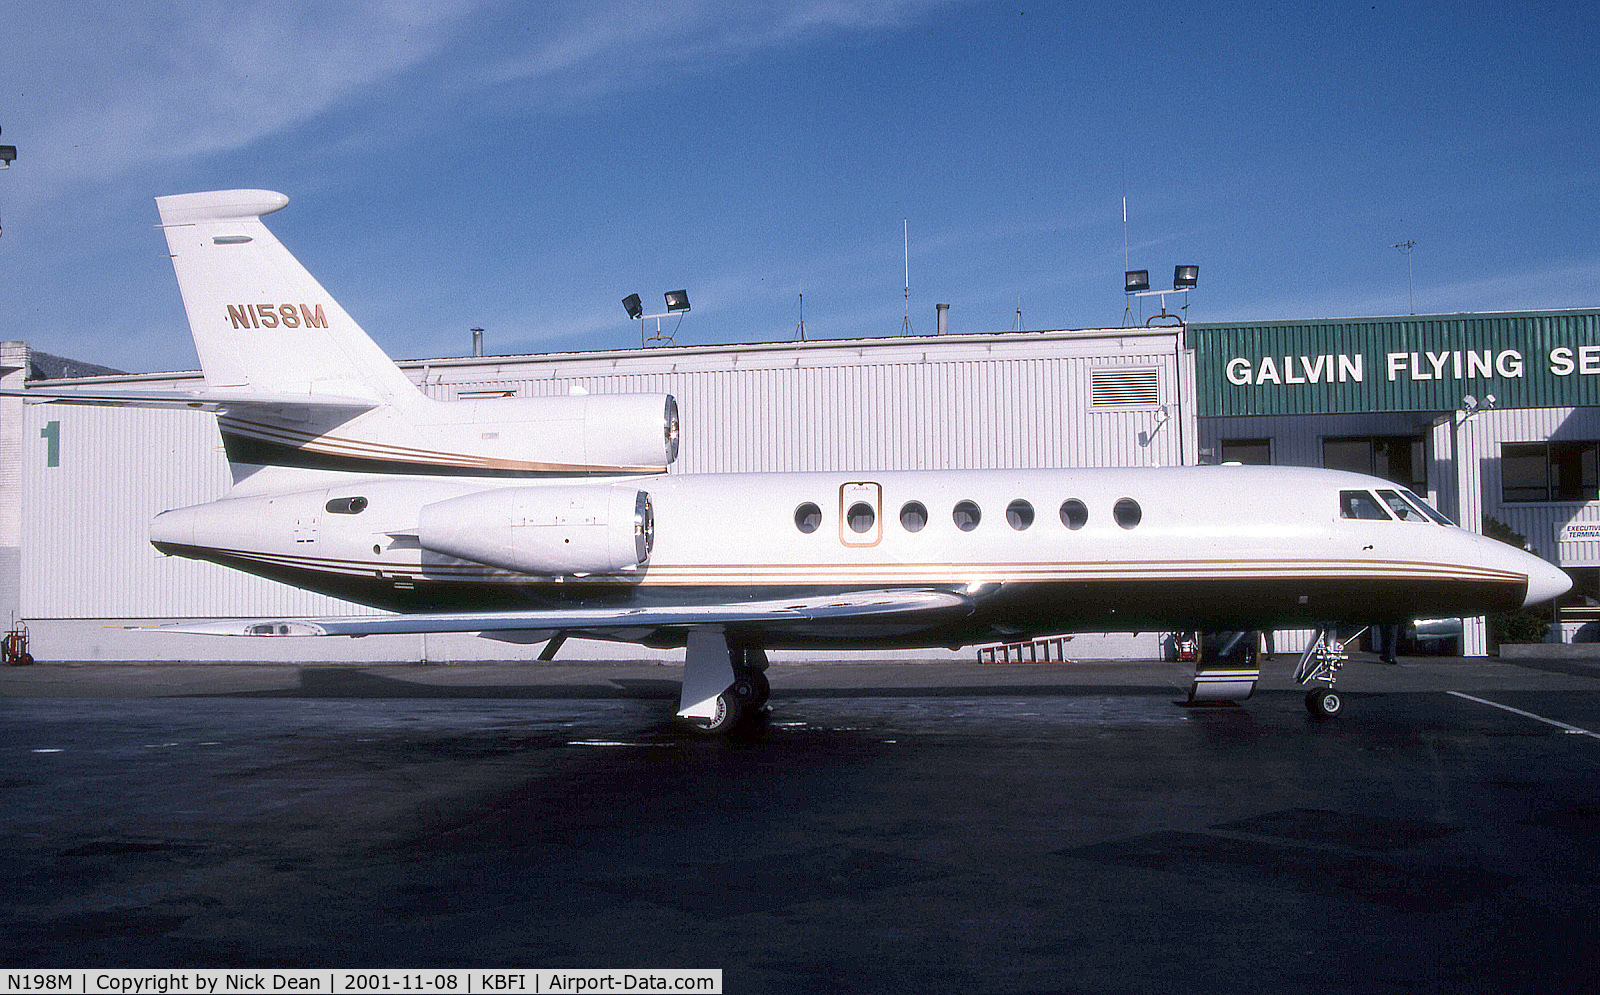 N198M, 1998 Dassault Mystere Falcon 50 C/N 273, Seen here as N158M this airframe is currently registered N198M as posted